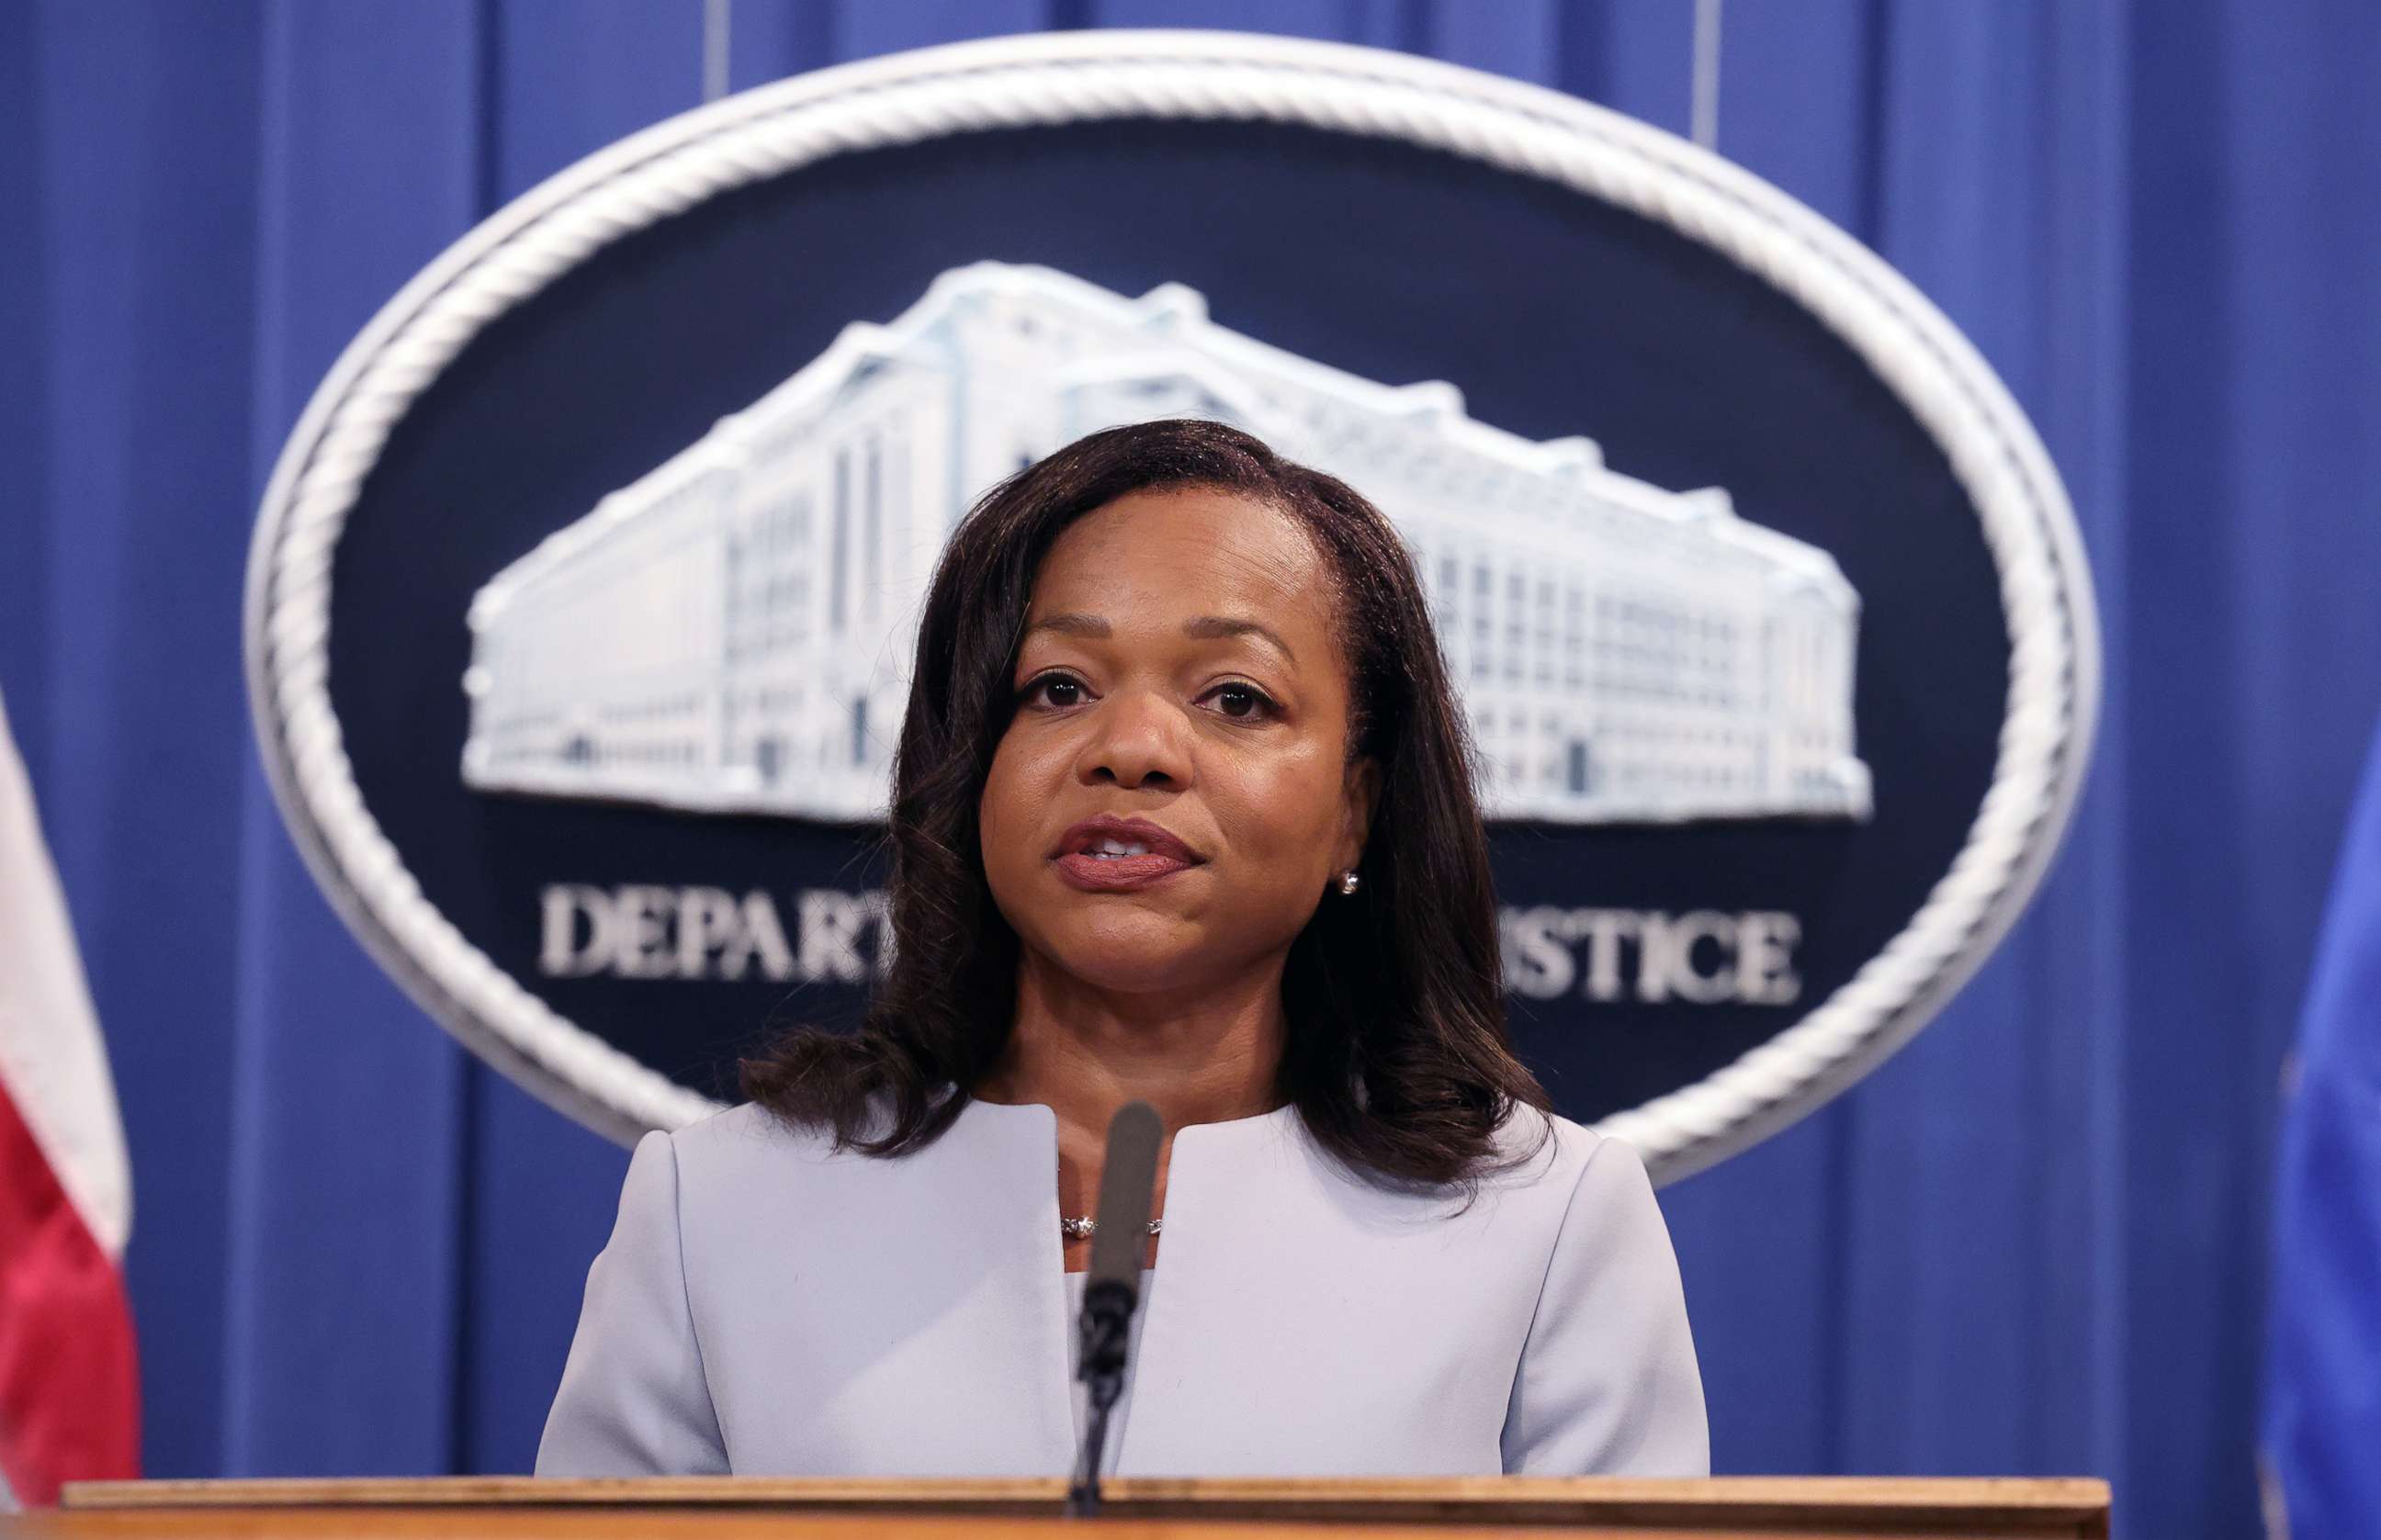 PHOTO: U.S. Assistant Attorney General for the Civil Rights Division Kristen Clarke speaks during a news conference at the Department of Justice, Aug. 5, 2021, in Washington, D.C.